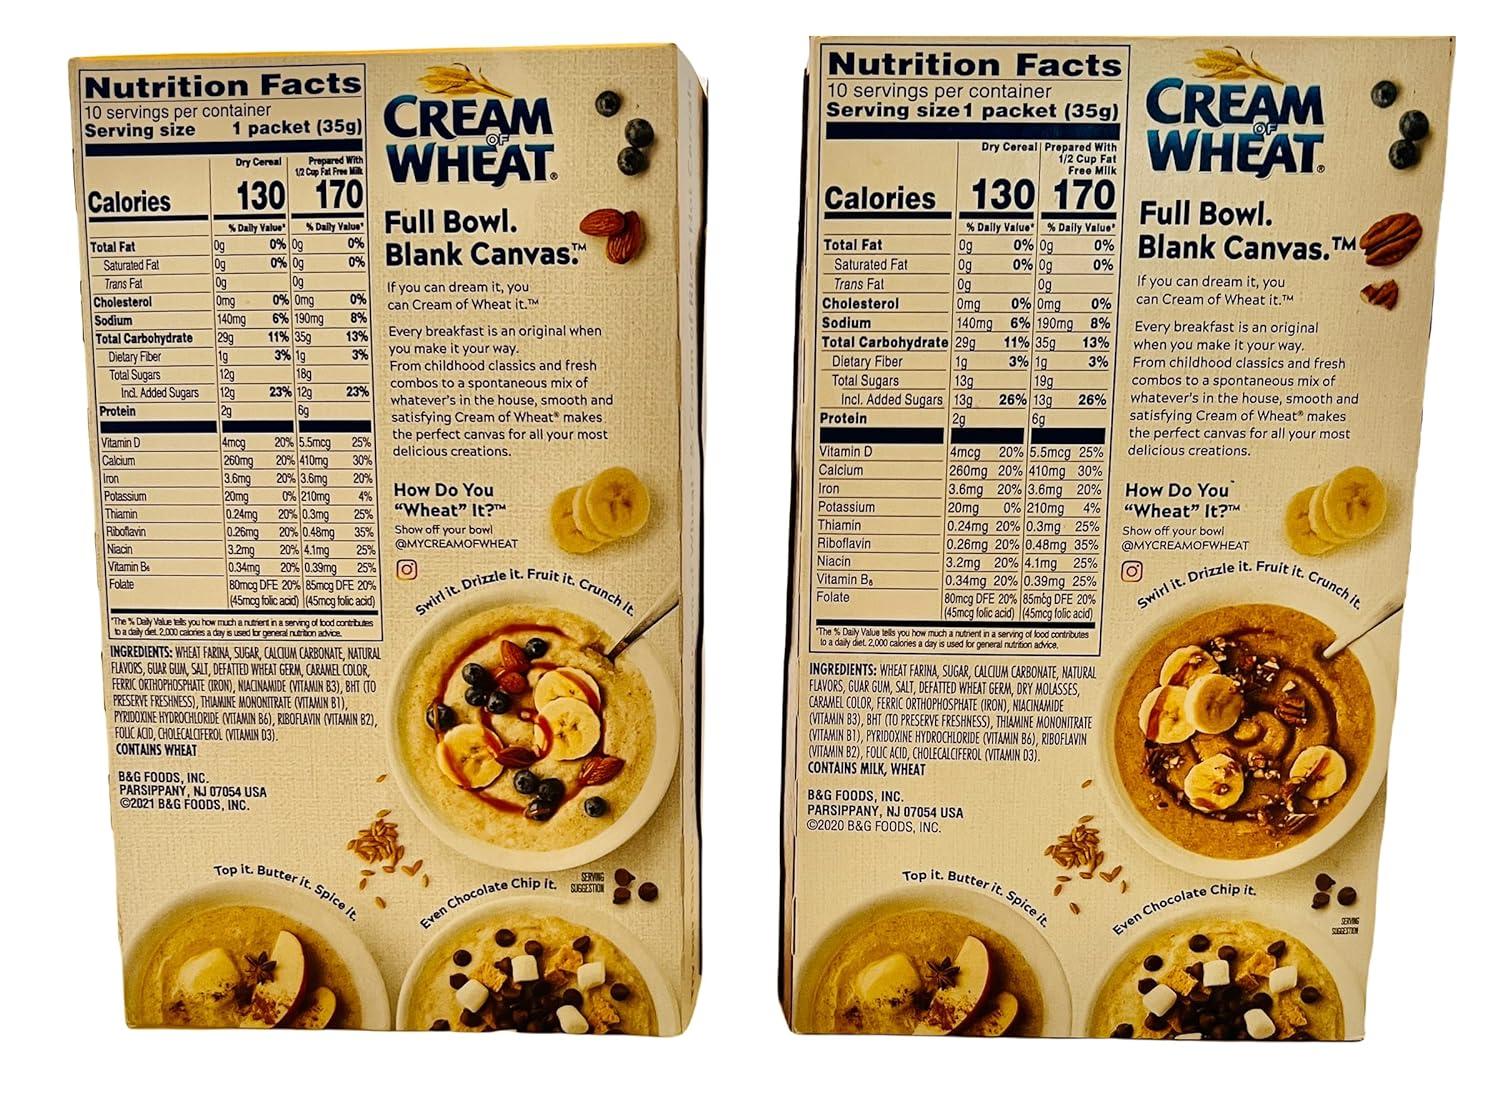 Cream Of Wheat Maple Brown Sugar Flavor Instant Hot Cereal 12.3 oz